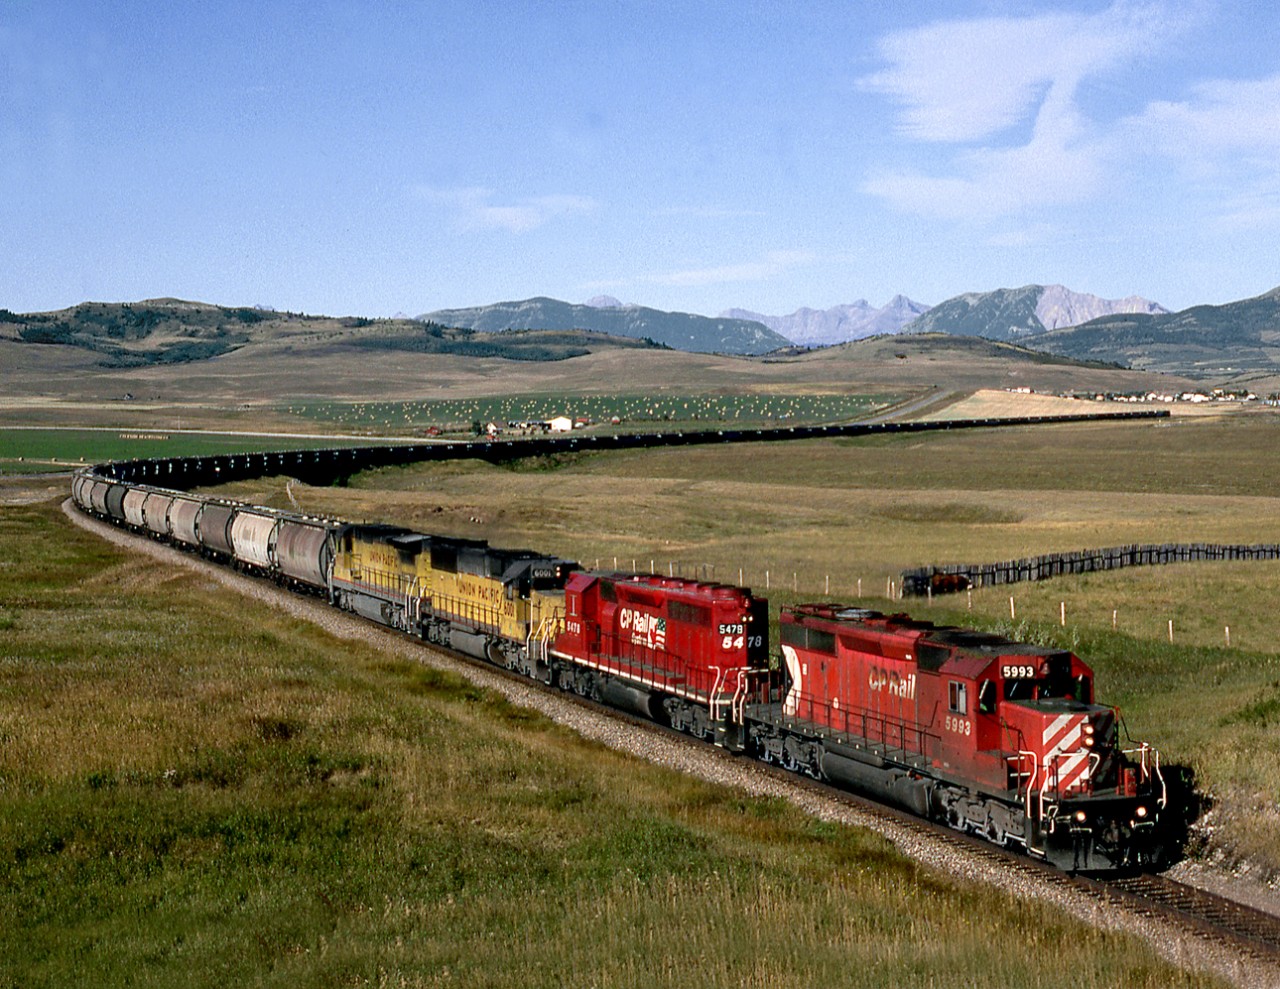 Potash empties off the Union Pacific at Kingsgate B.C. have just crossed Crowsnest Pass and is crossing the high plains between Lundbreck and Cowley